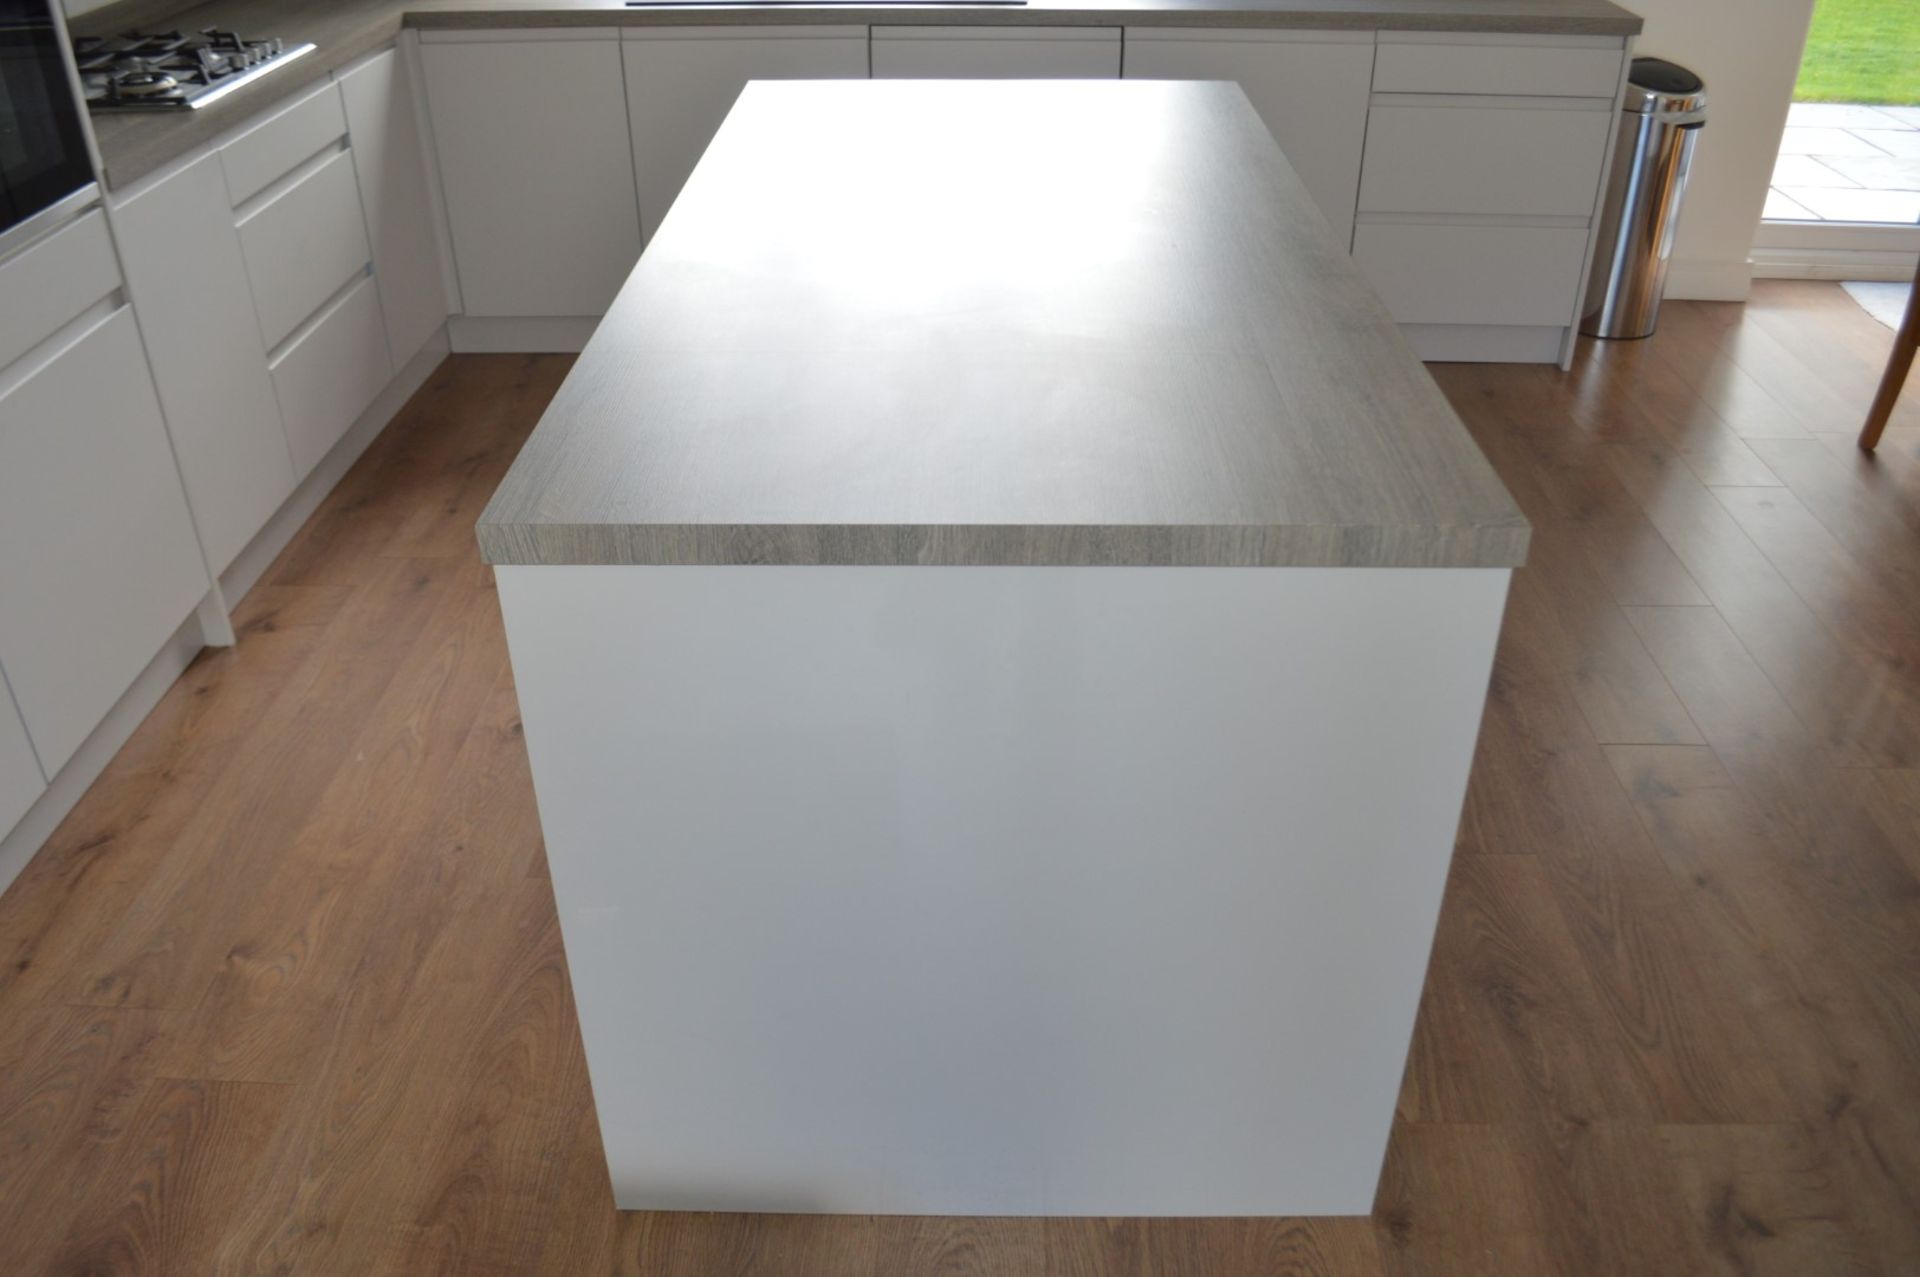 1 x Contemporary Handleless Fitted Kitchen Featuring A White Finish, Laminate Worktops, And - Image 26 of 28